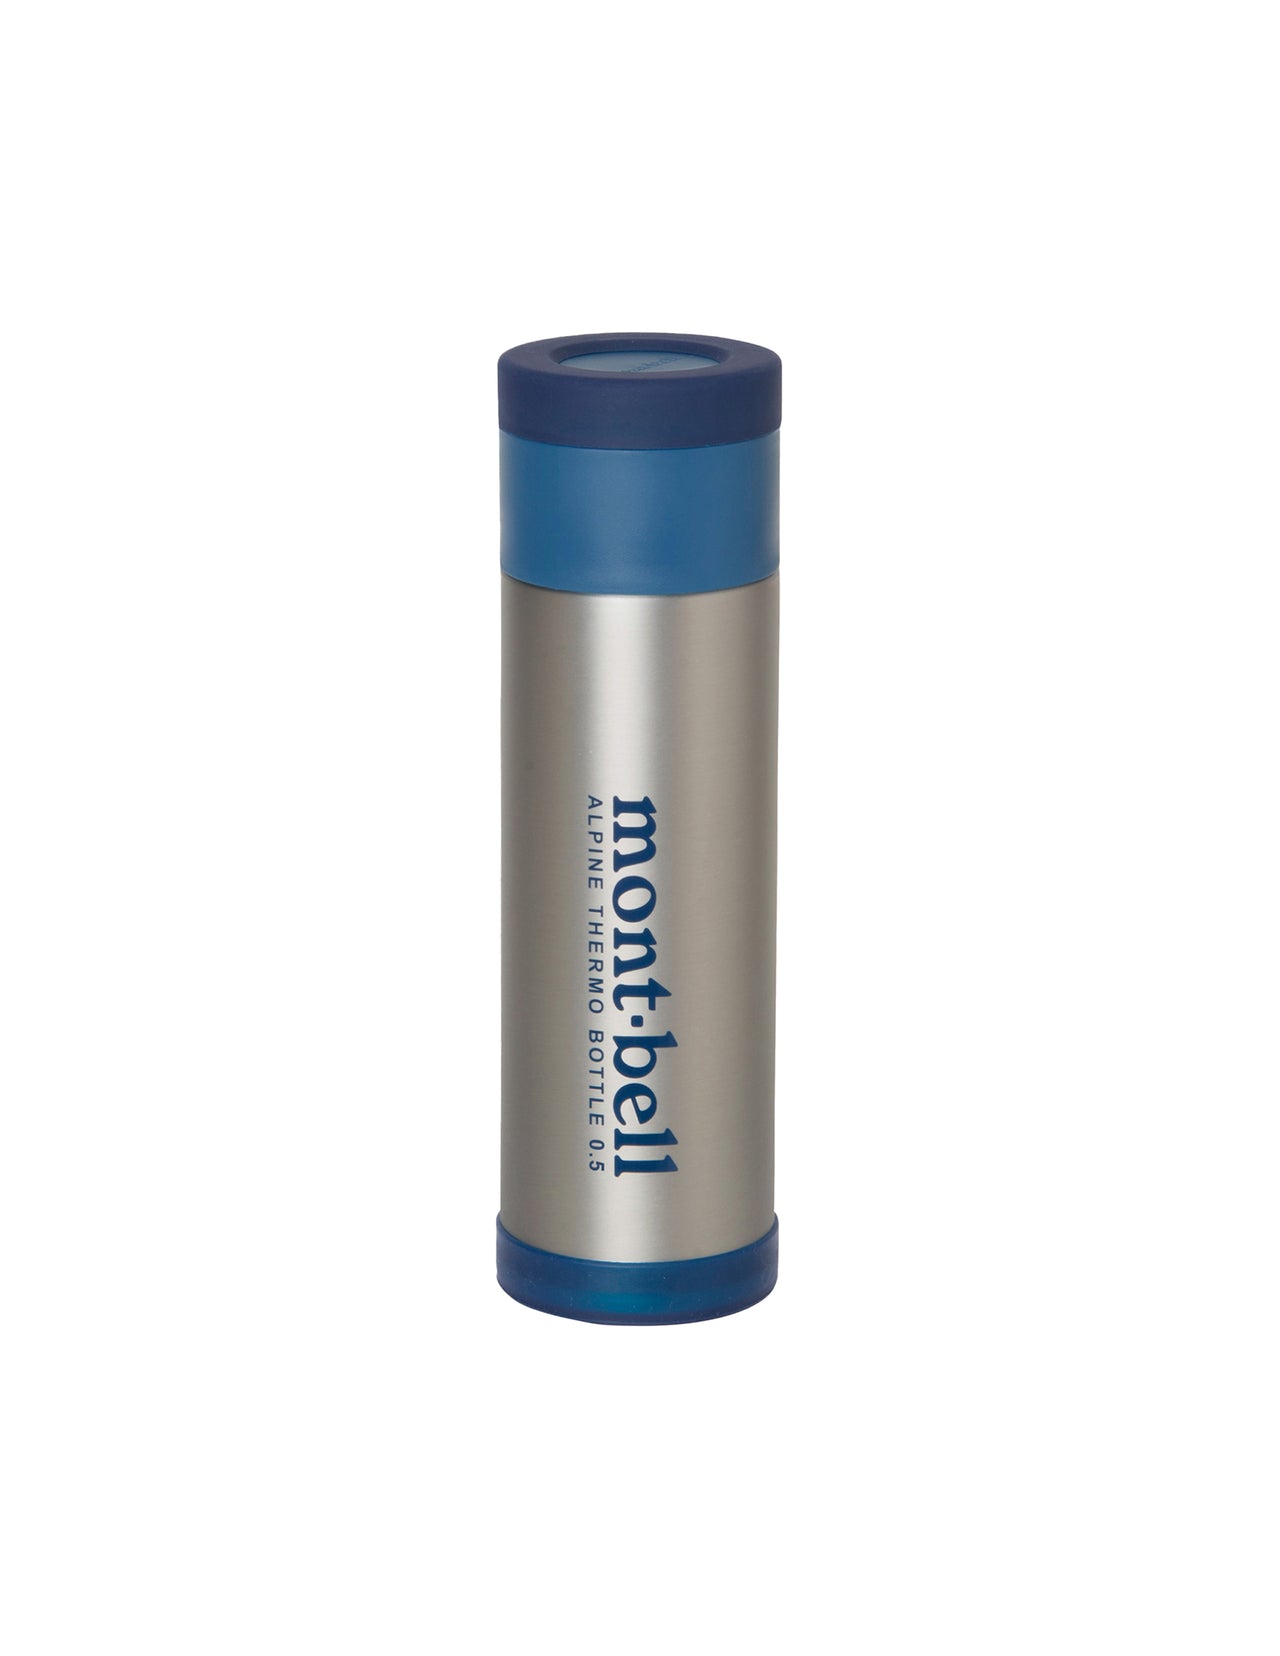 Alpine Thermo Bottle 0.5L in Stainless